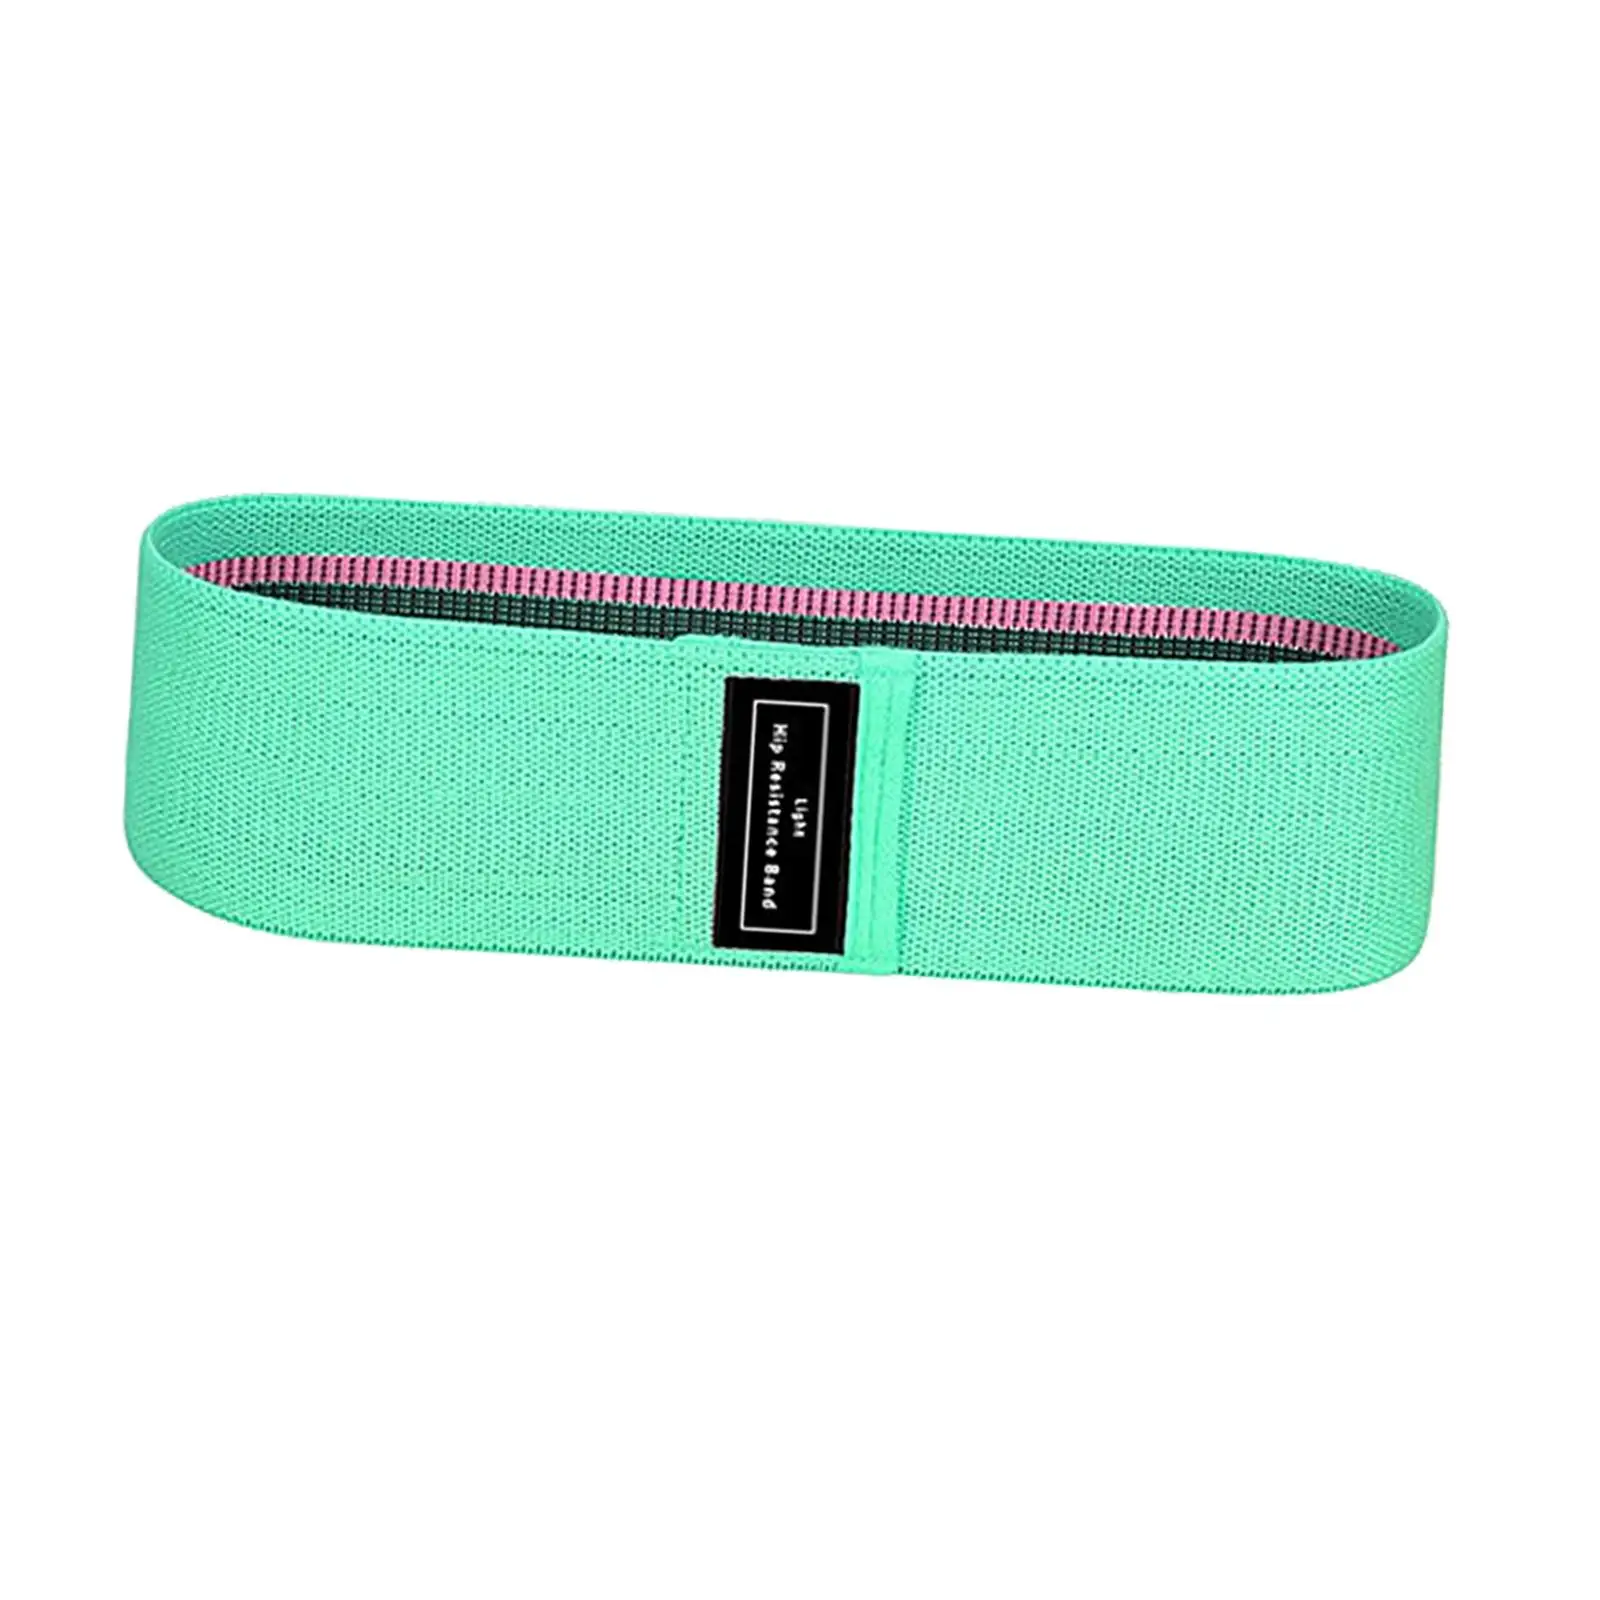 Portable Resistance Band Exercise Non Slip Stretch Band Elastic Loop Band for